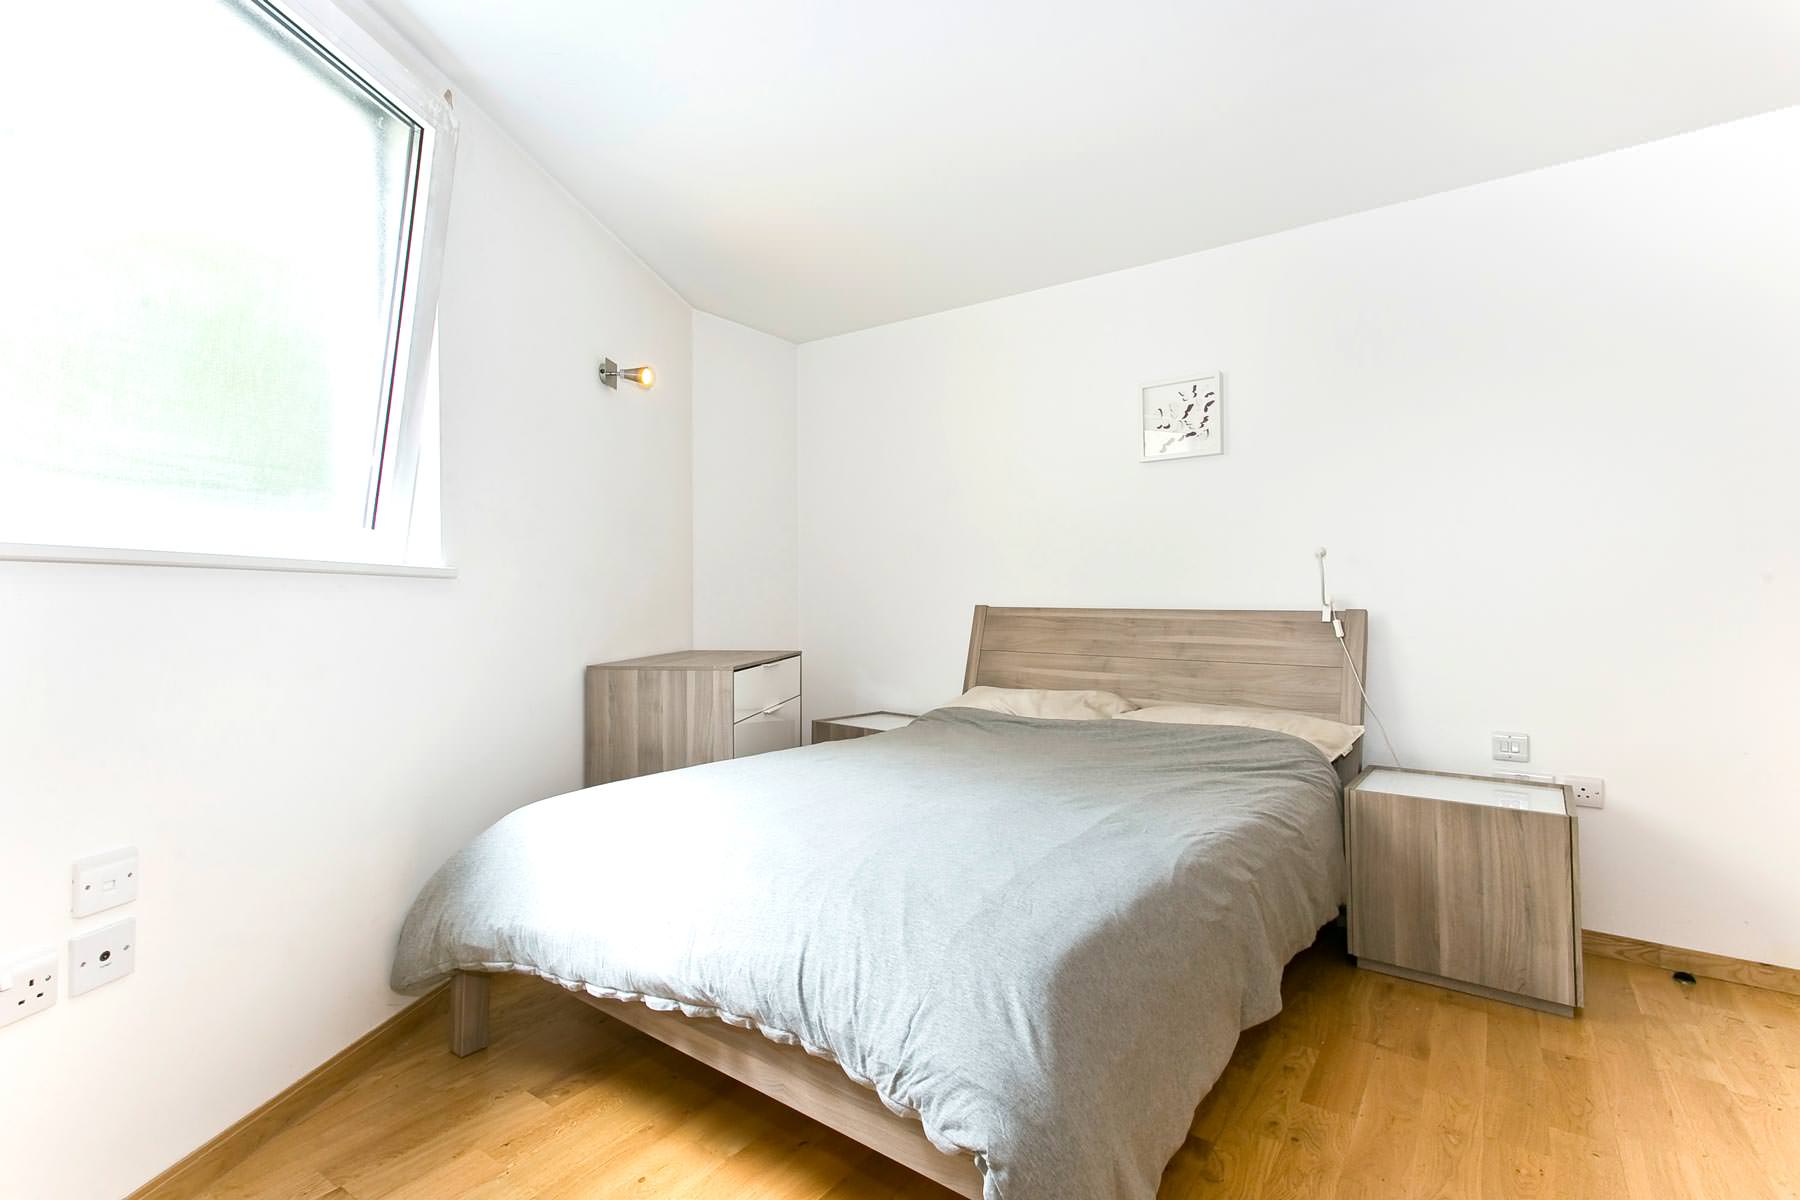 London House Exchange | Listing - Flat 3, Tower Mint Apartments, E1